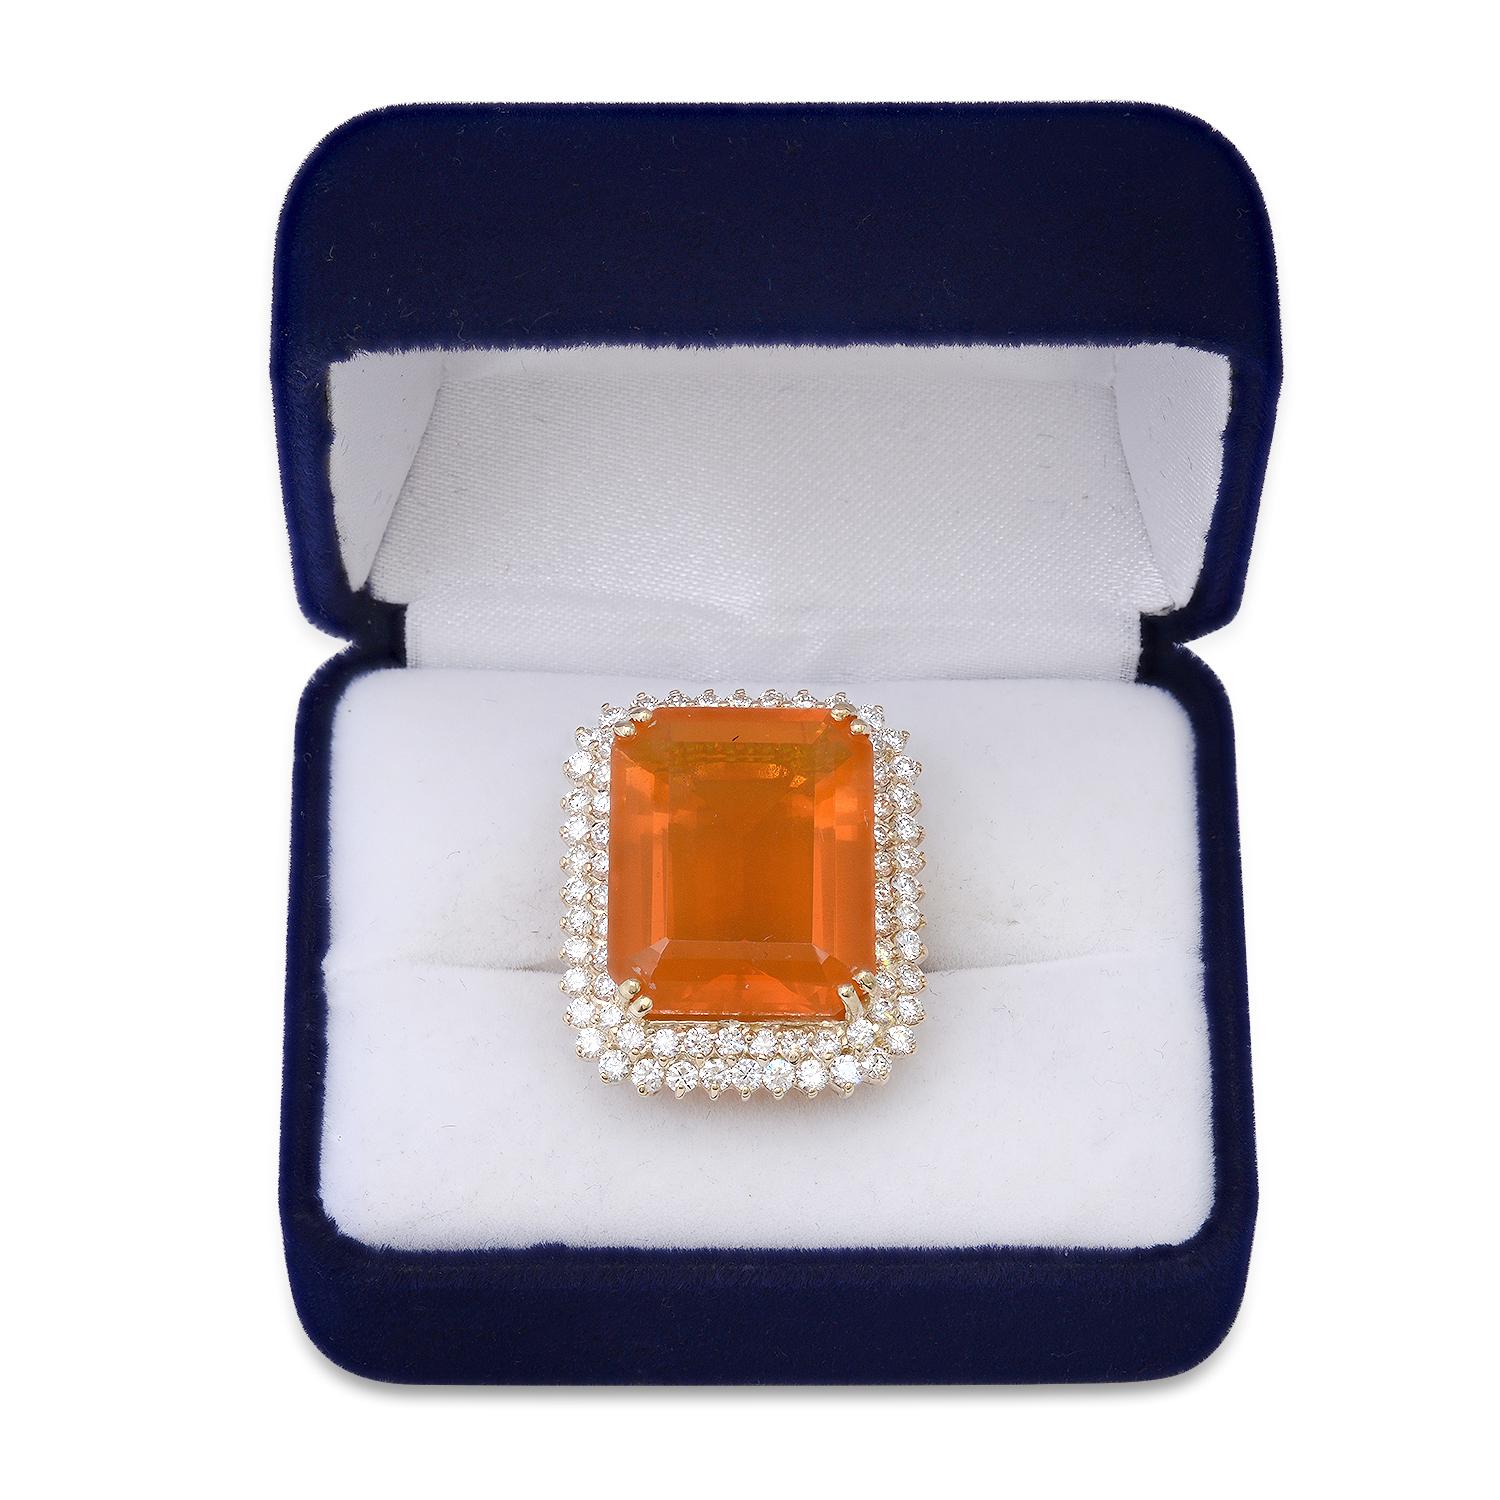 14K Yellow Gold Setting with 20.89ct Fire Opal and 2.70ct Diamond Ring